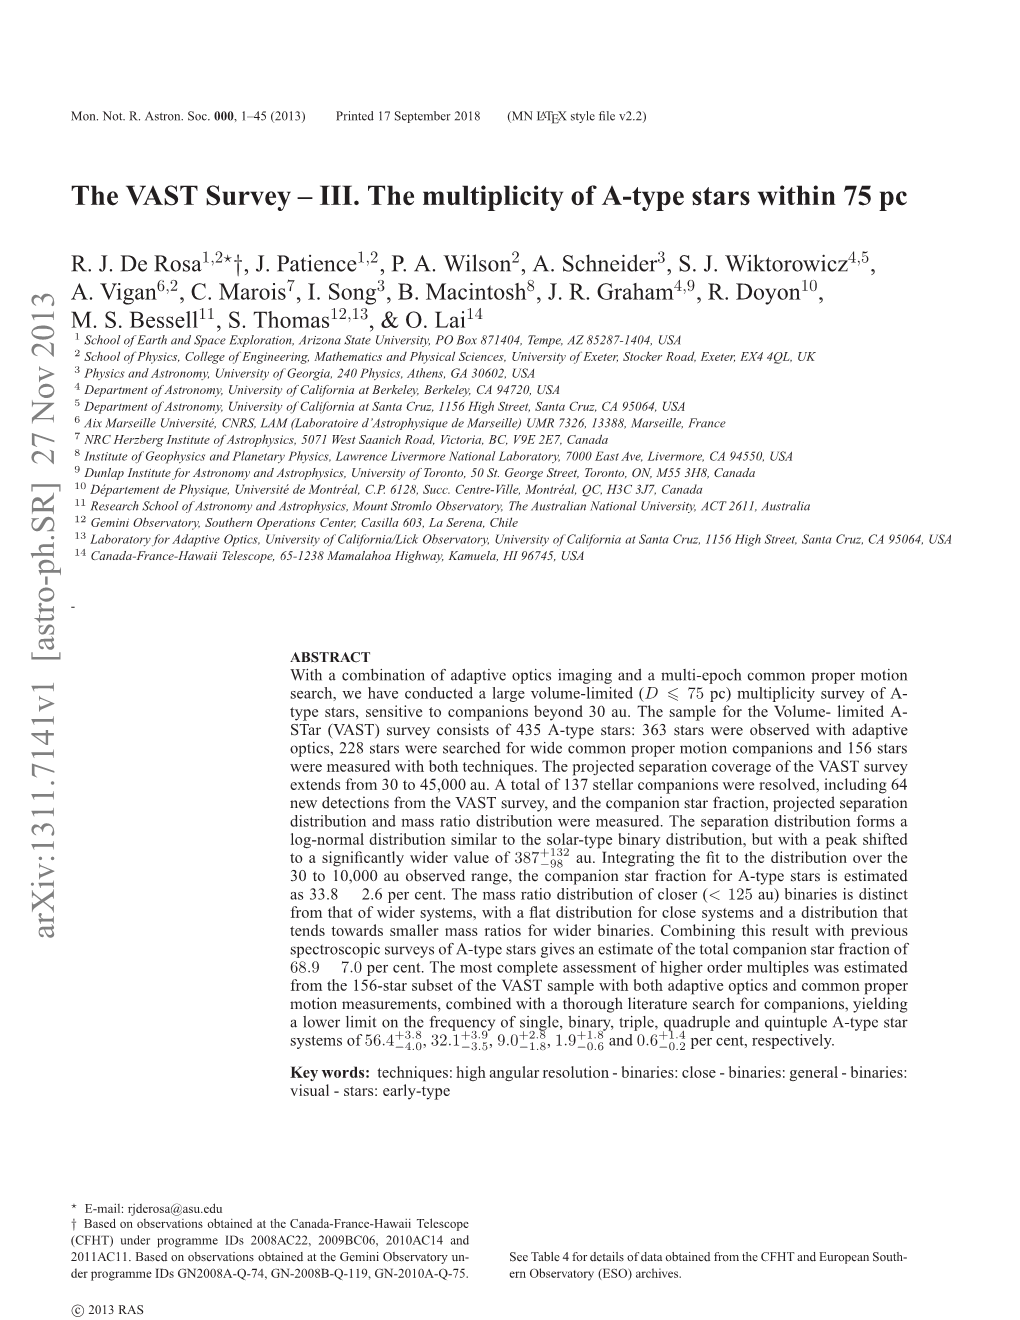 The VAST Survey-III. the Multiplicity of A-Type Stars Within 75 Pc